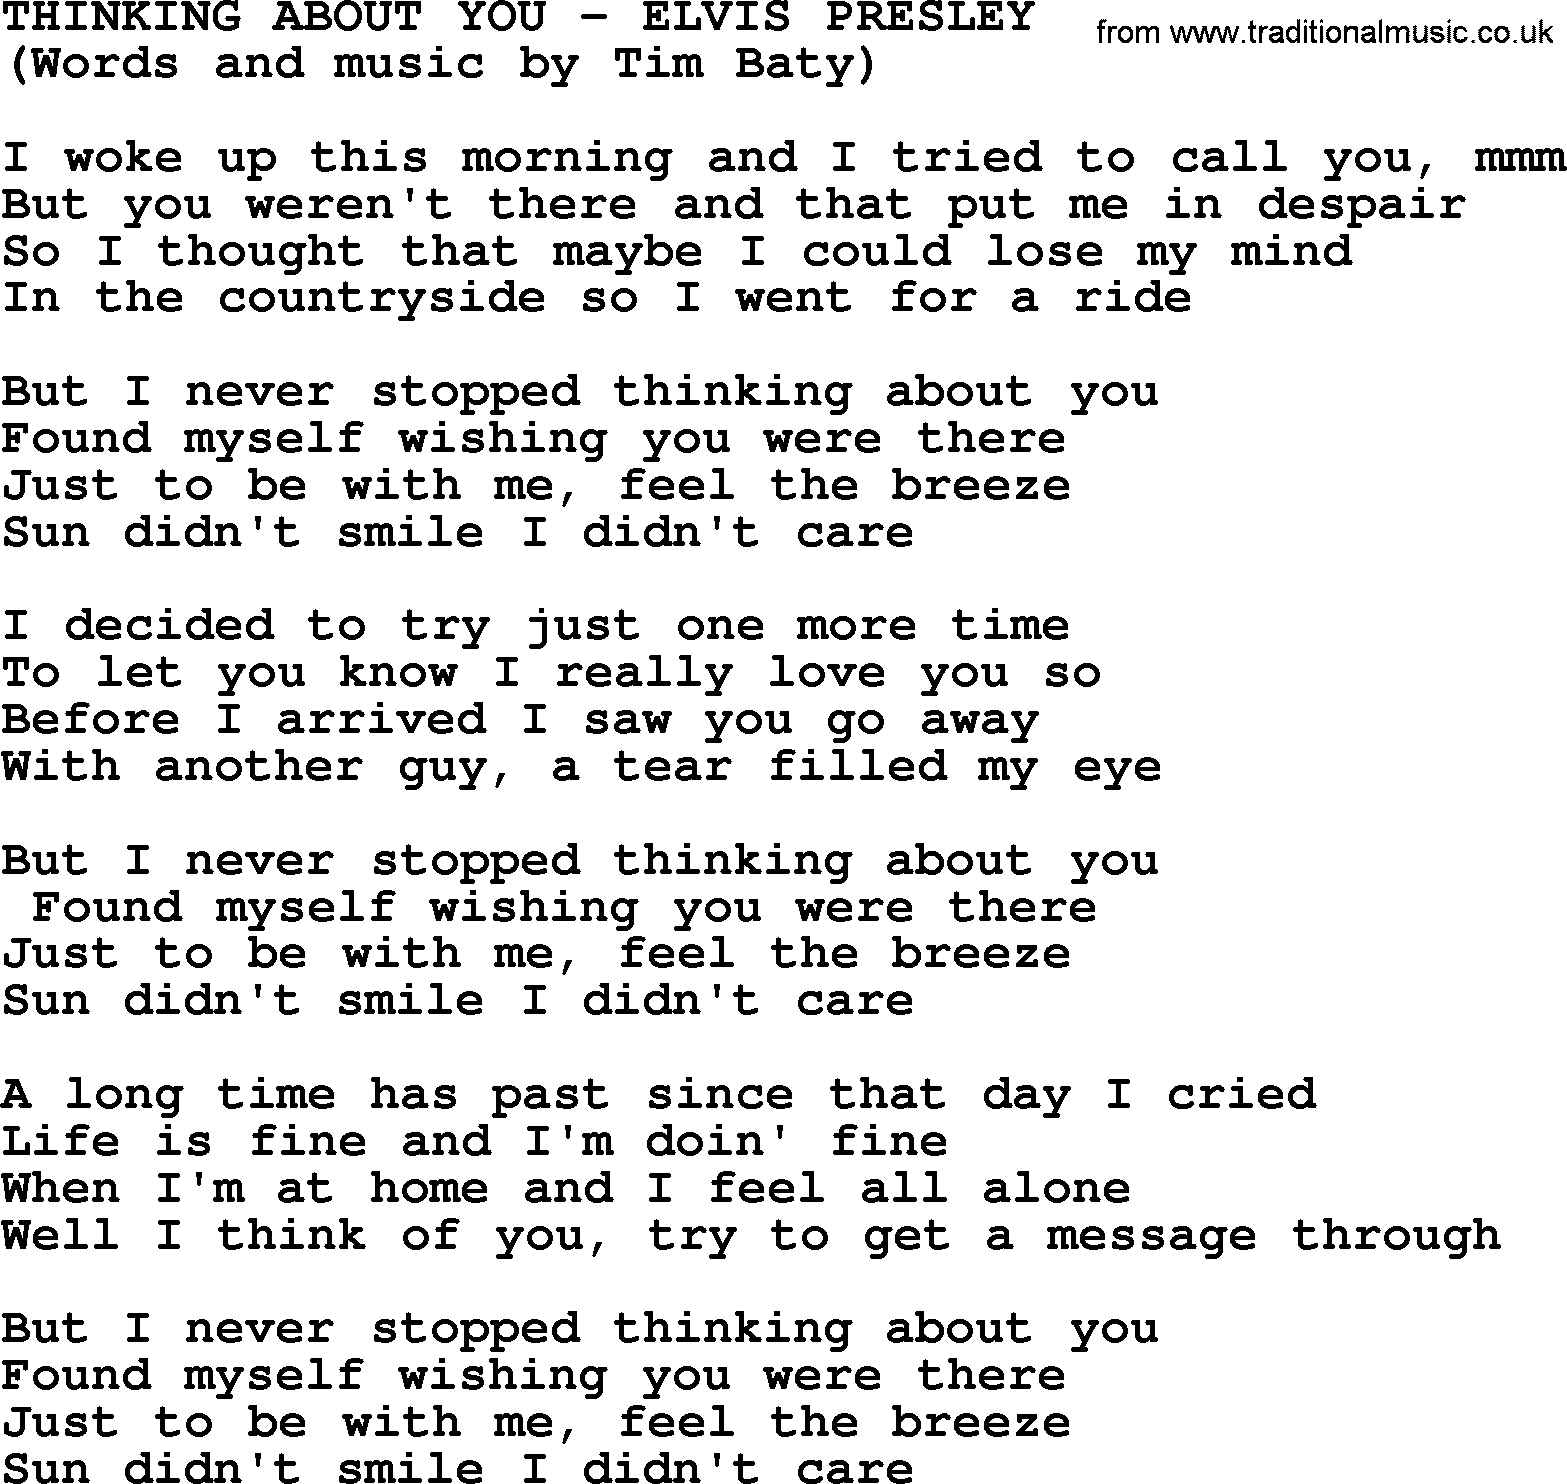 Elvis Presley song: Thinking About You lyrics